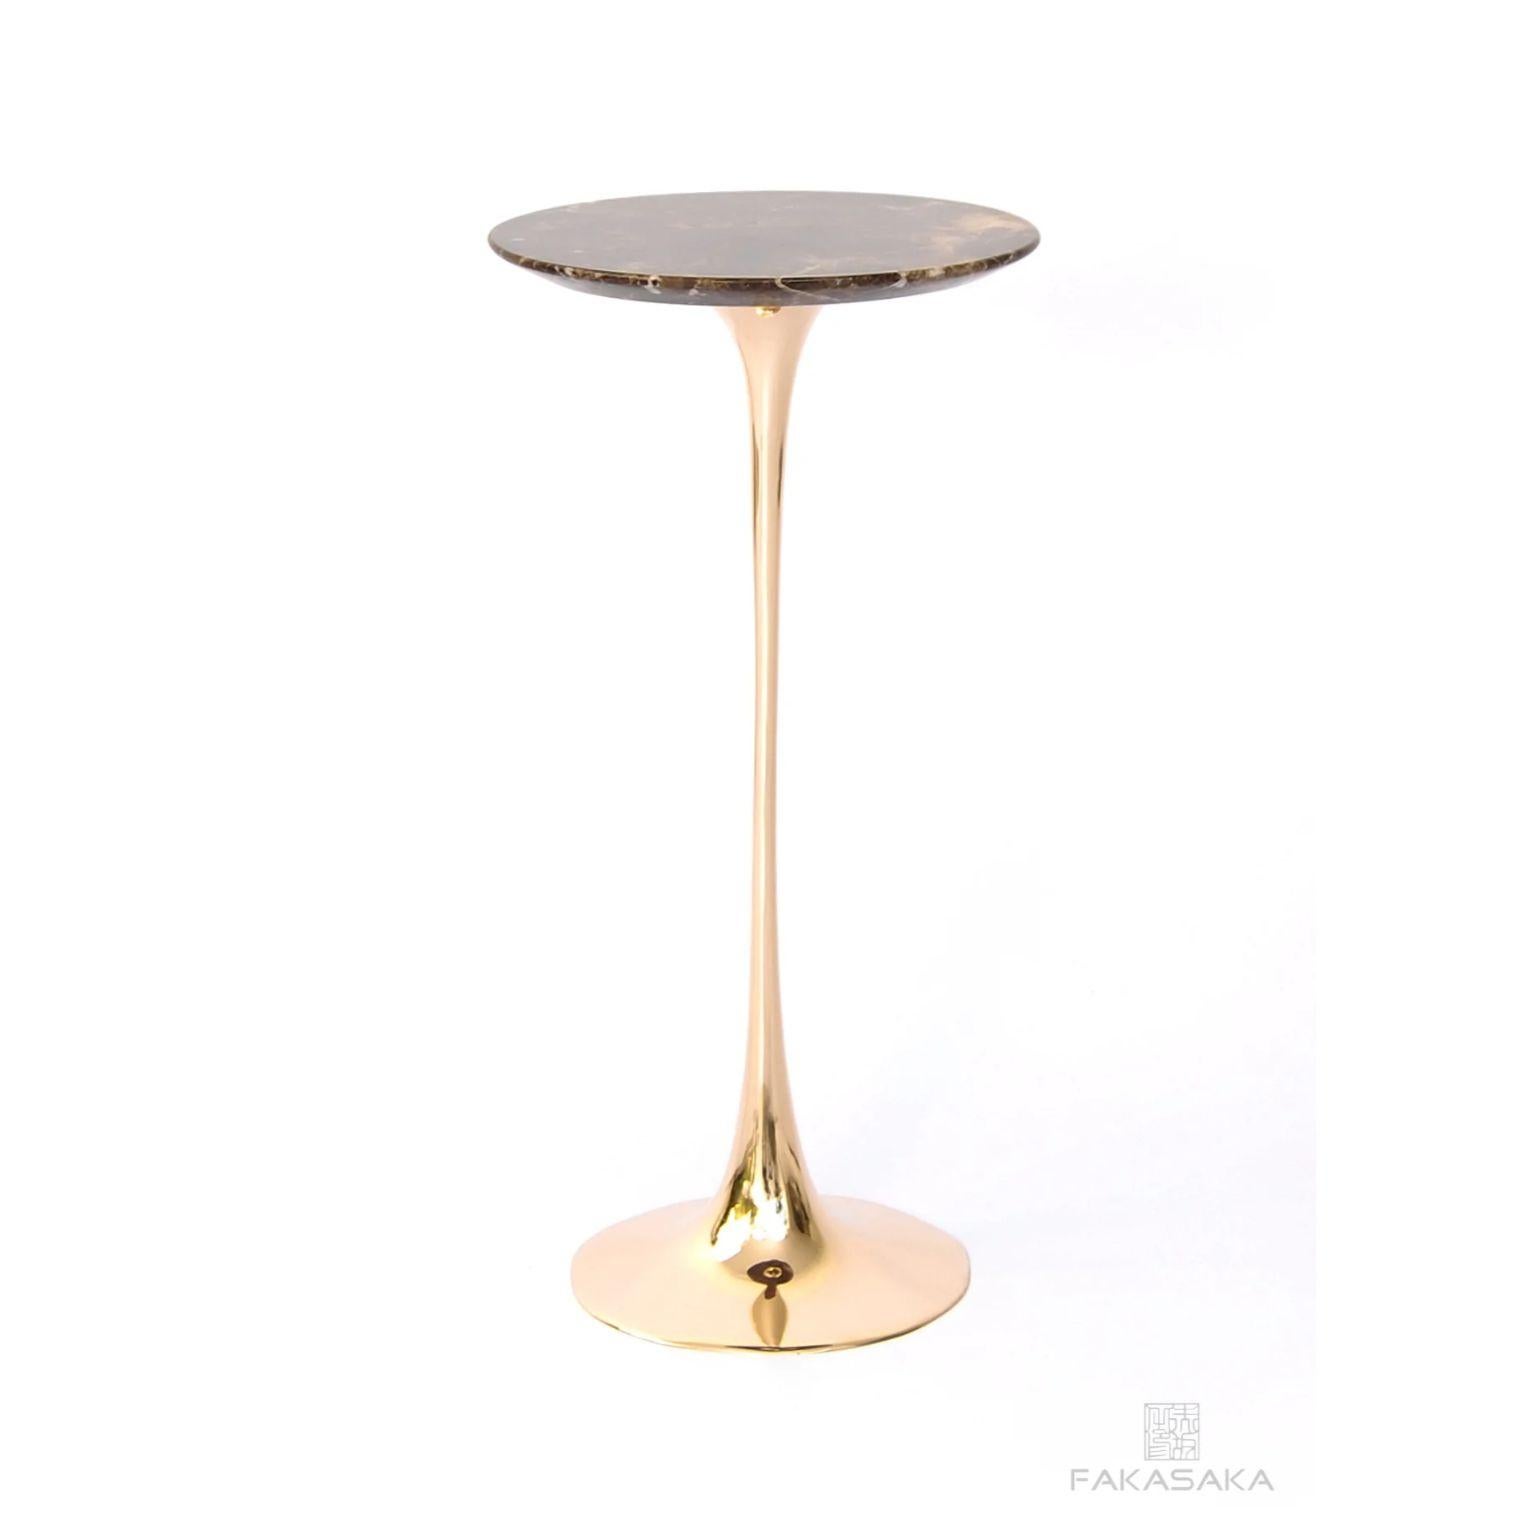 Apple drink table with Marrom Imperial marble top by Fakasaka Design.
Dimensions: W 30 cm D 30 cm H 61 cm.
Materials: polished bronze base, Marrom Imperial marble top.
 
Also available in different table top materials:
Nero Marquina Marble